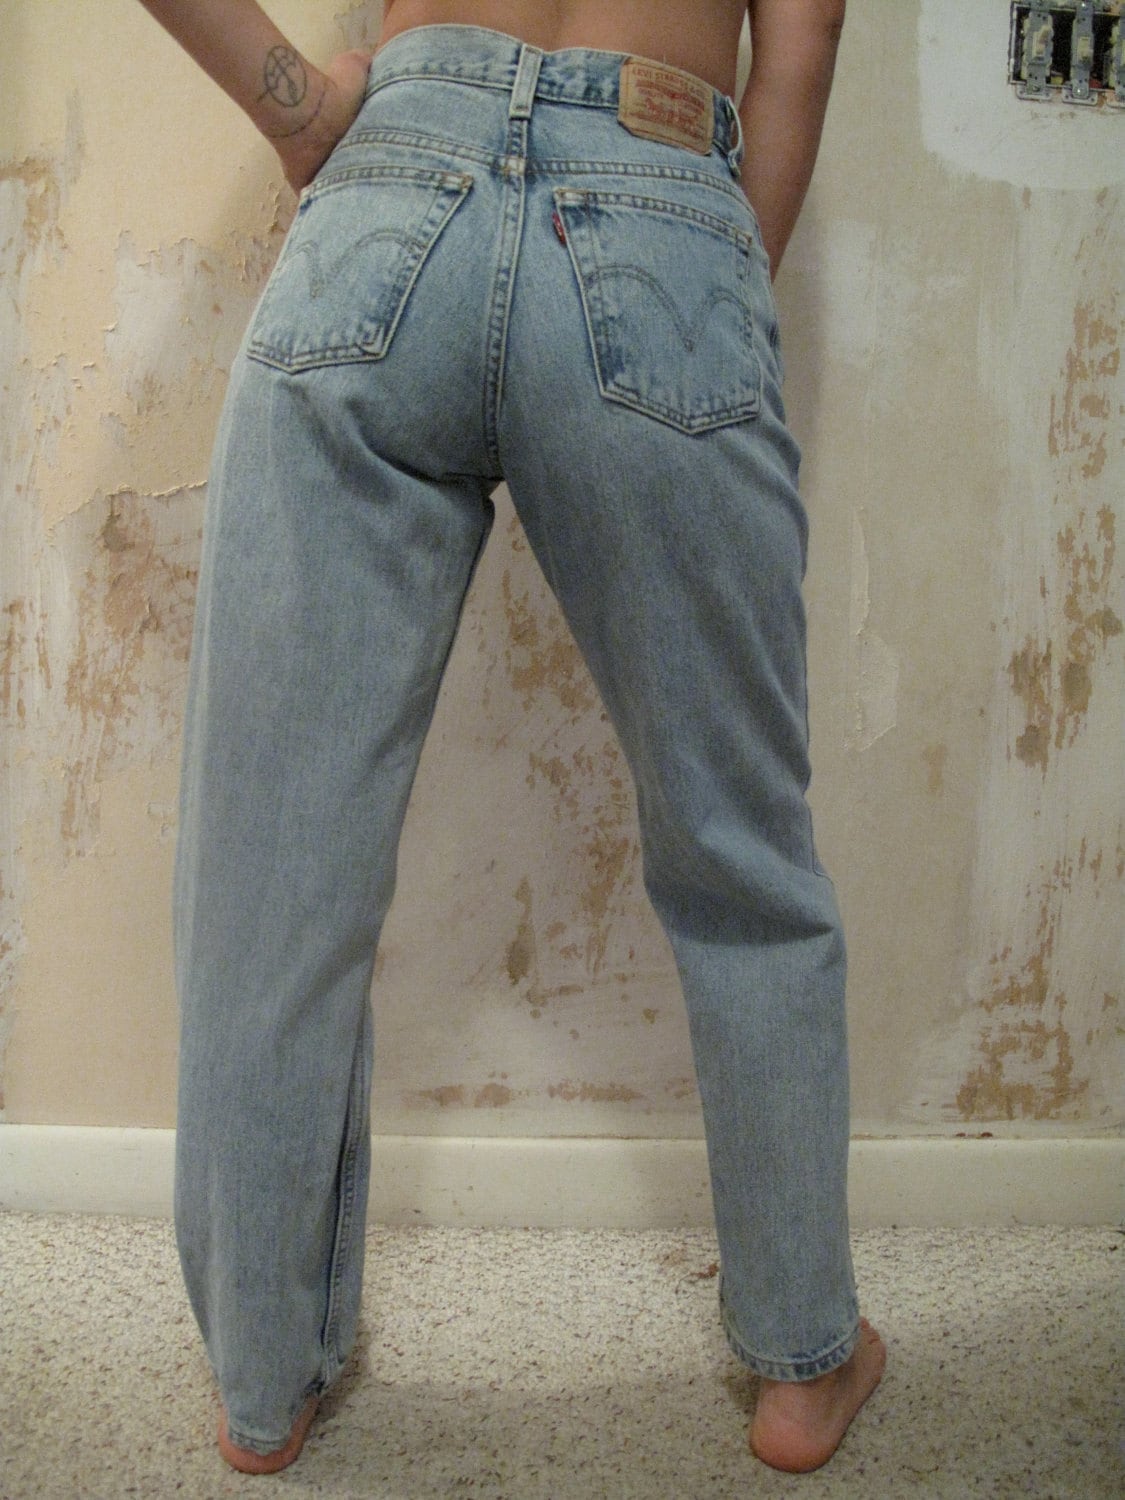 Vintage Levi's 550 red tab high waisted women's jeans